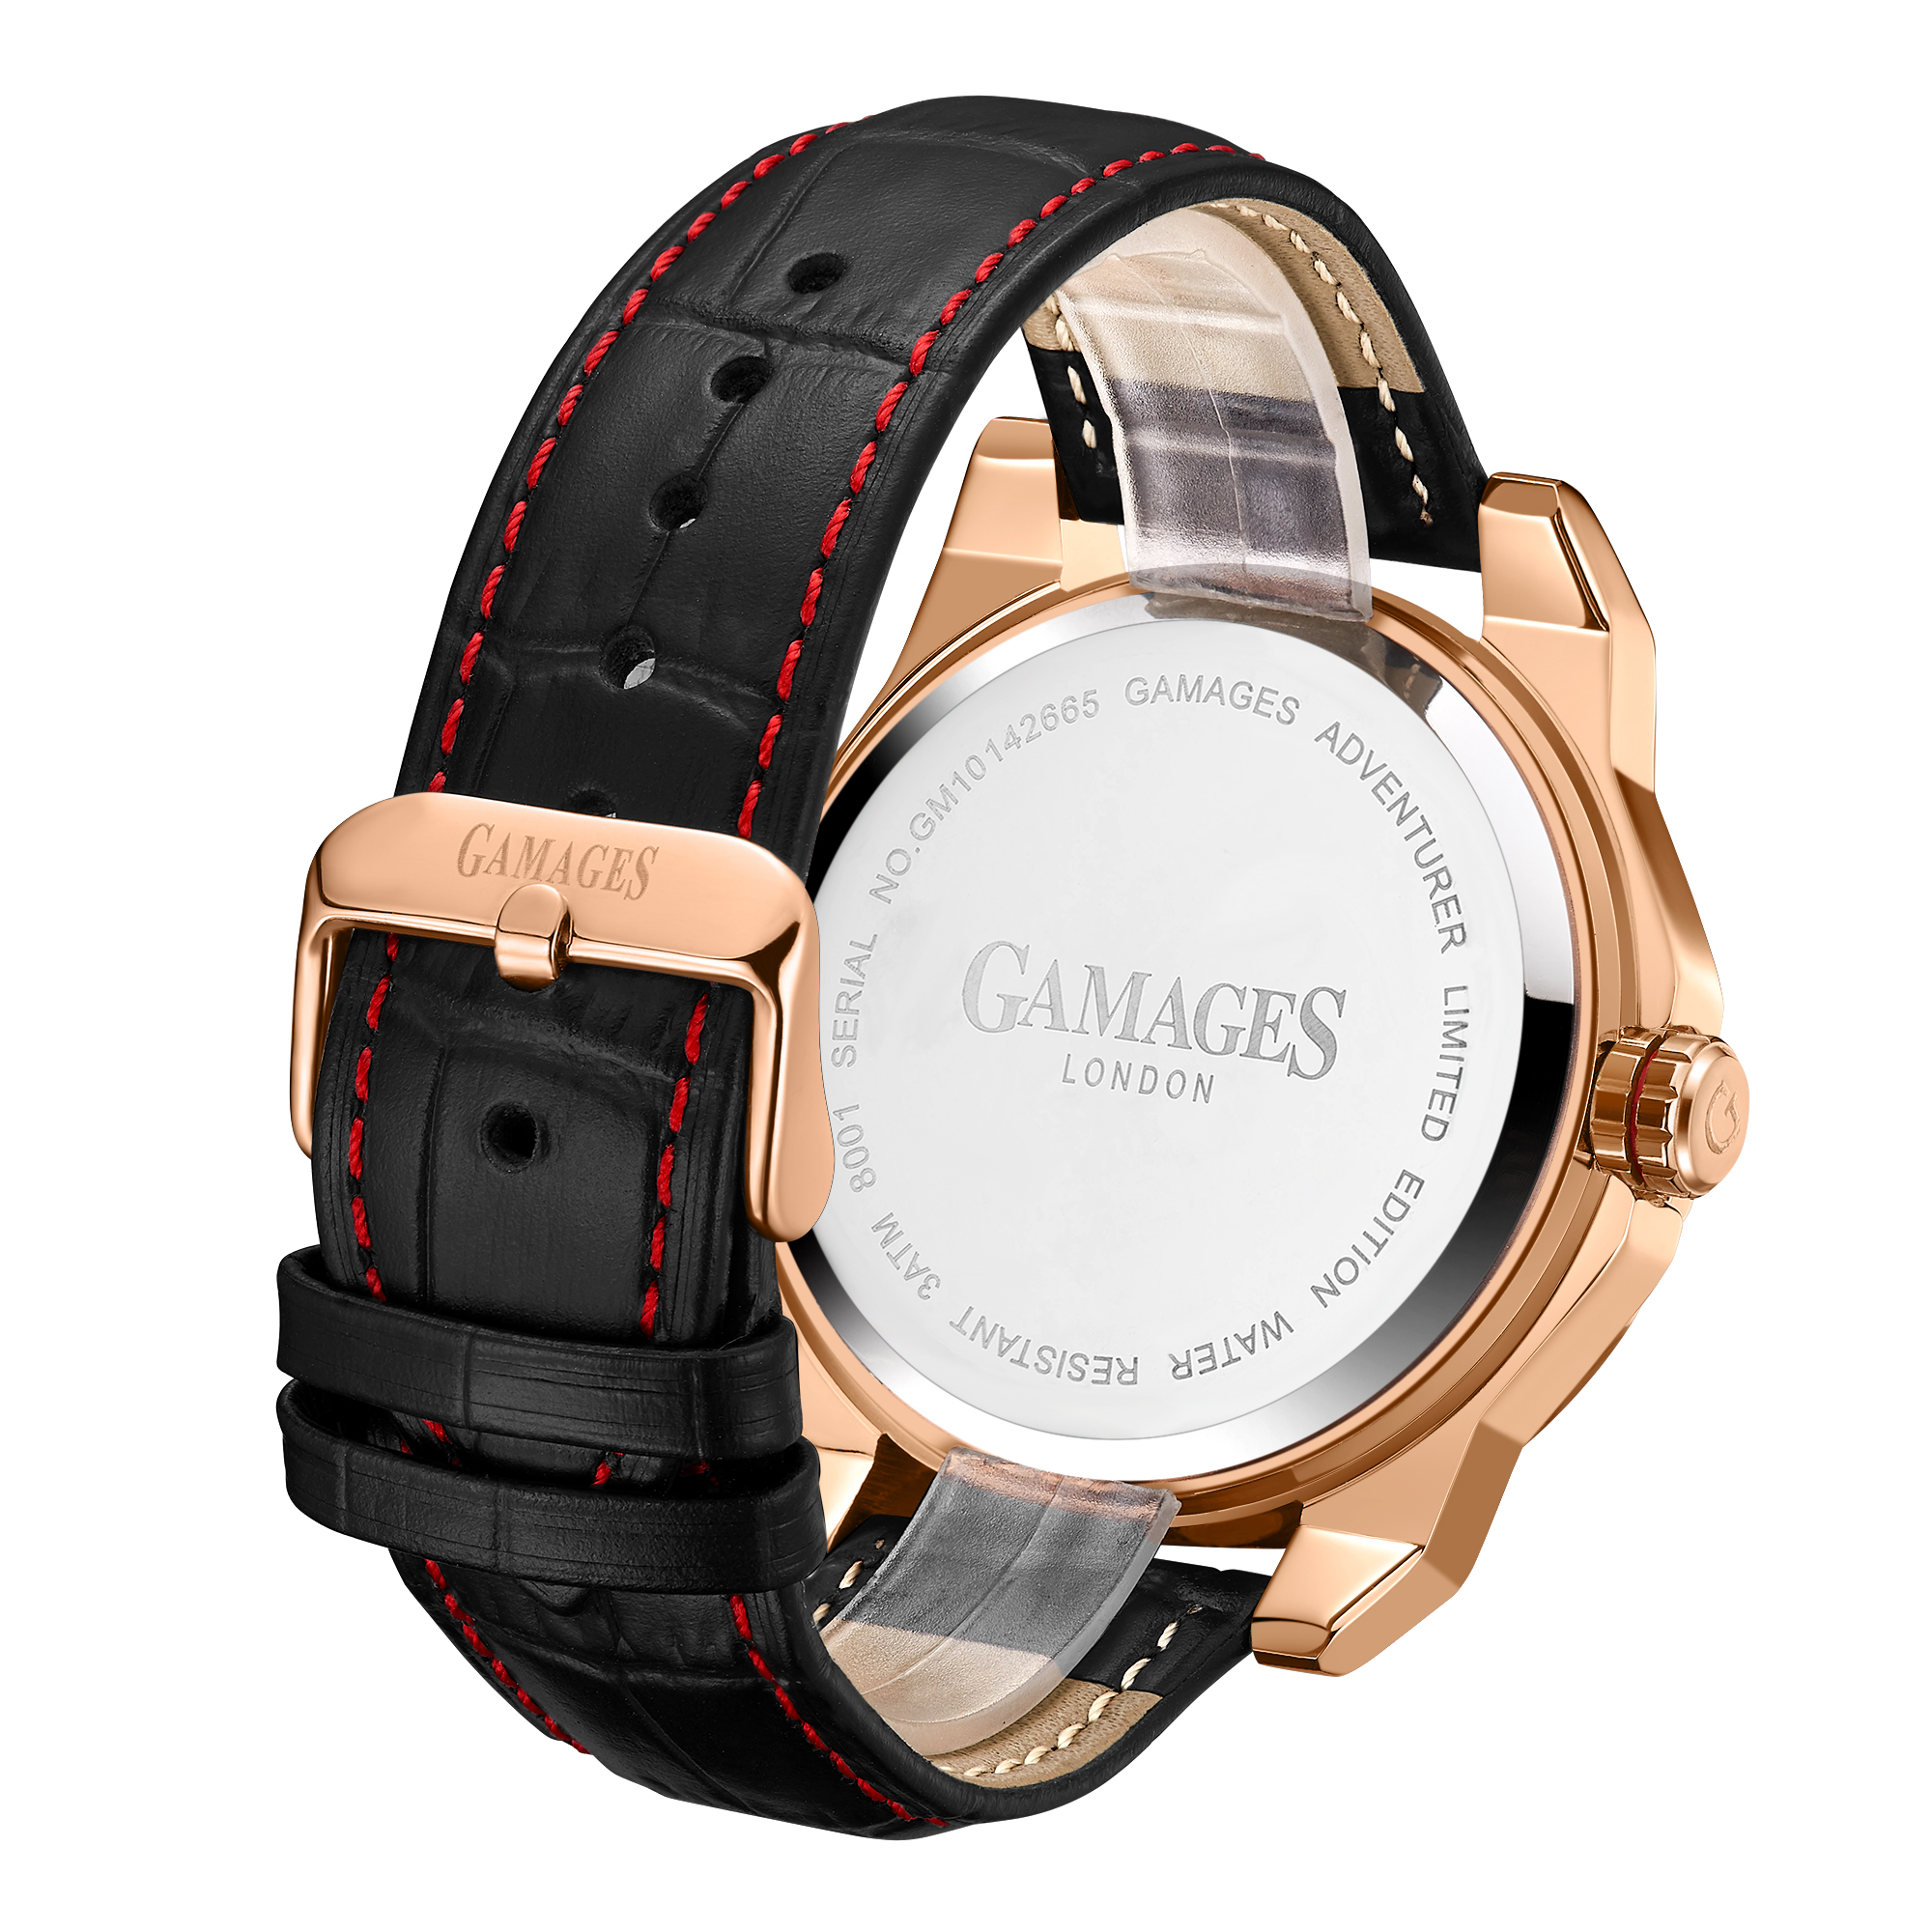 Gamages of London Hand Assembled Adventurer Automatic Rose Red - 5 Years Warranty and Free Deliver.. - Image 2 of 5